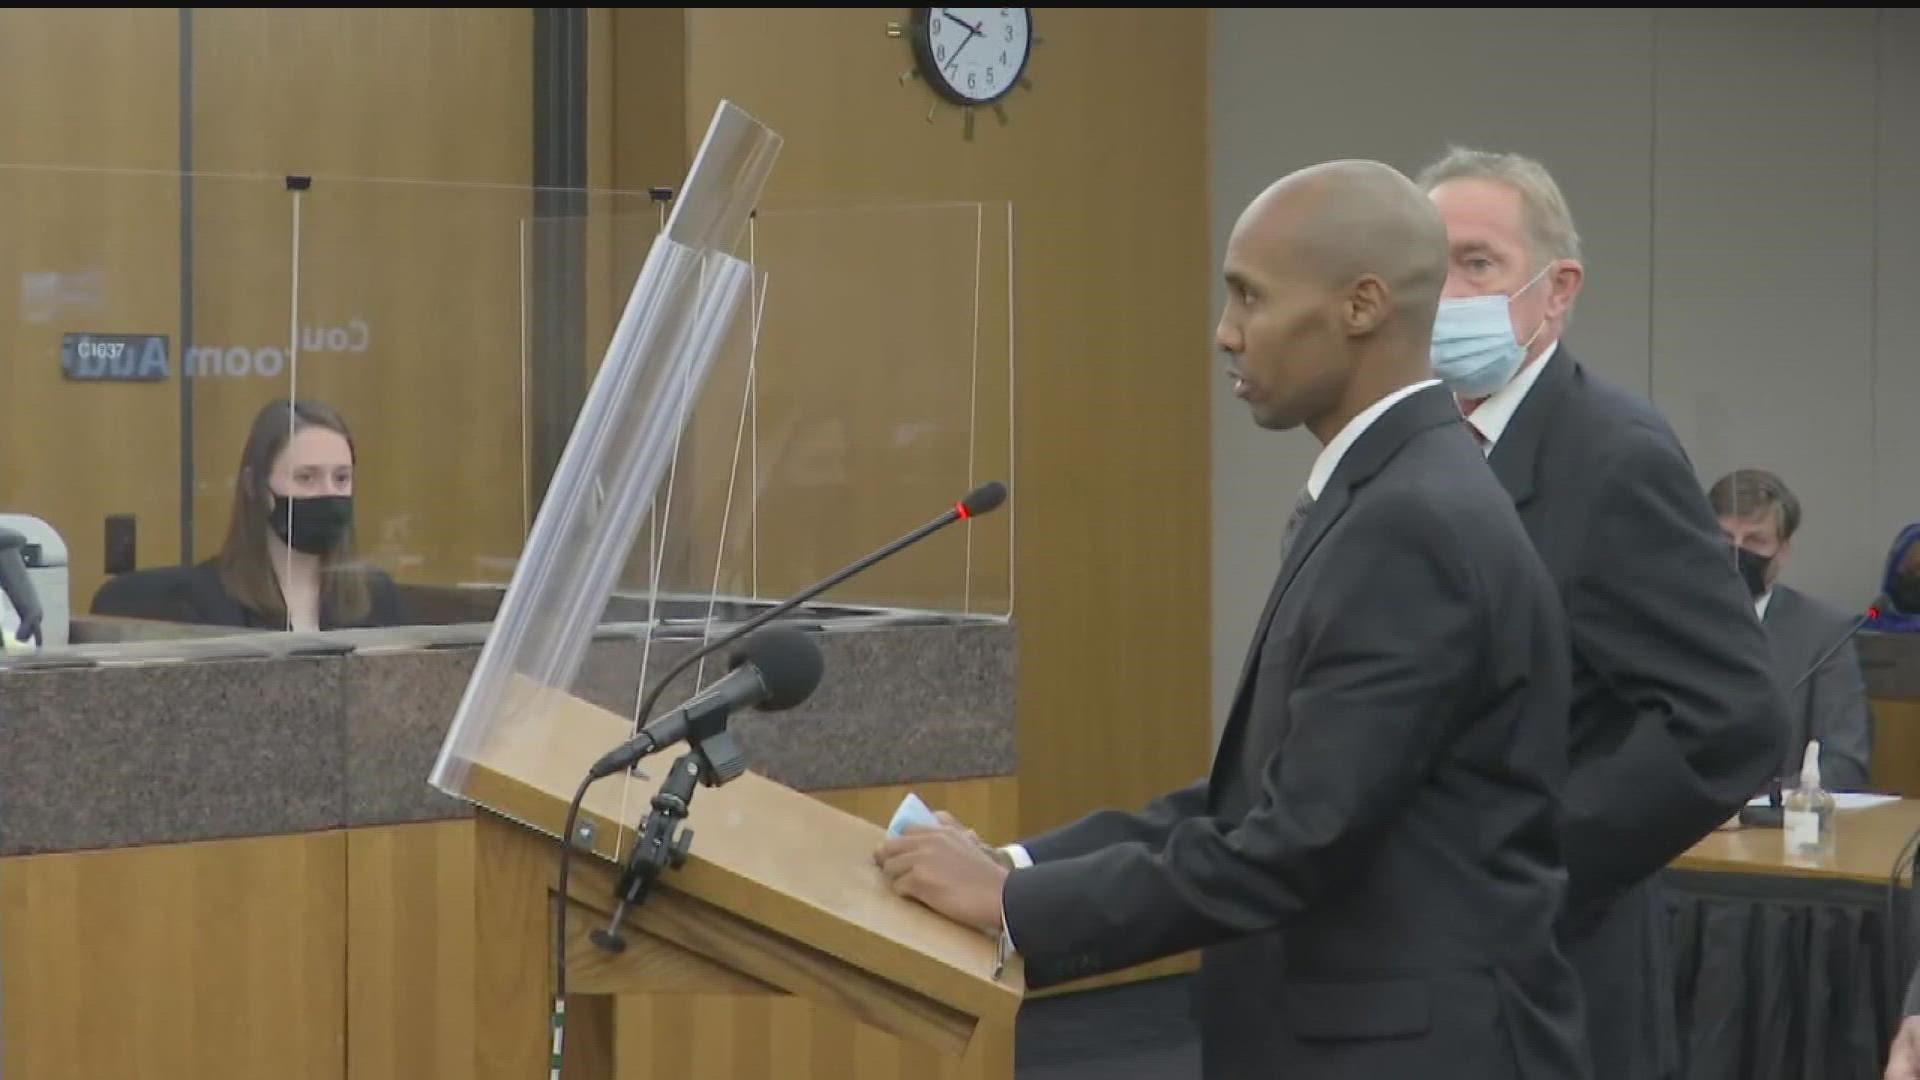 Mohamed Noor was convicted of fatally shooting a woman five years ago.